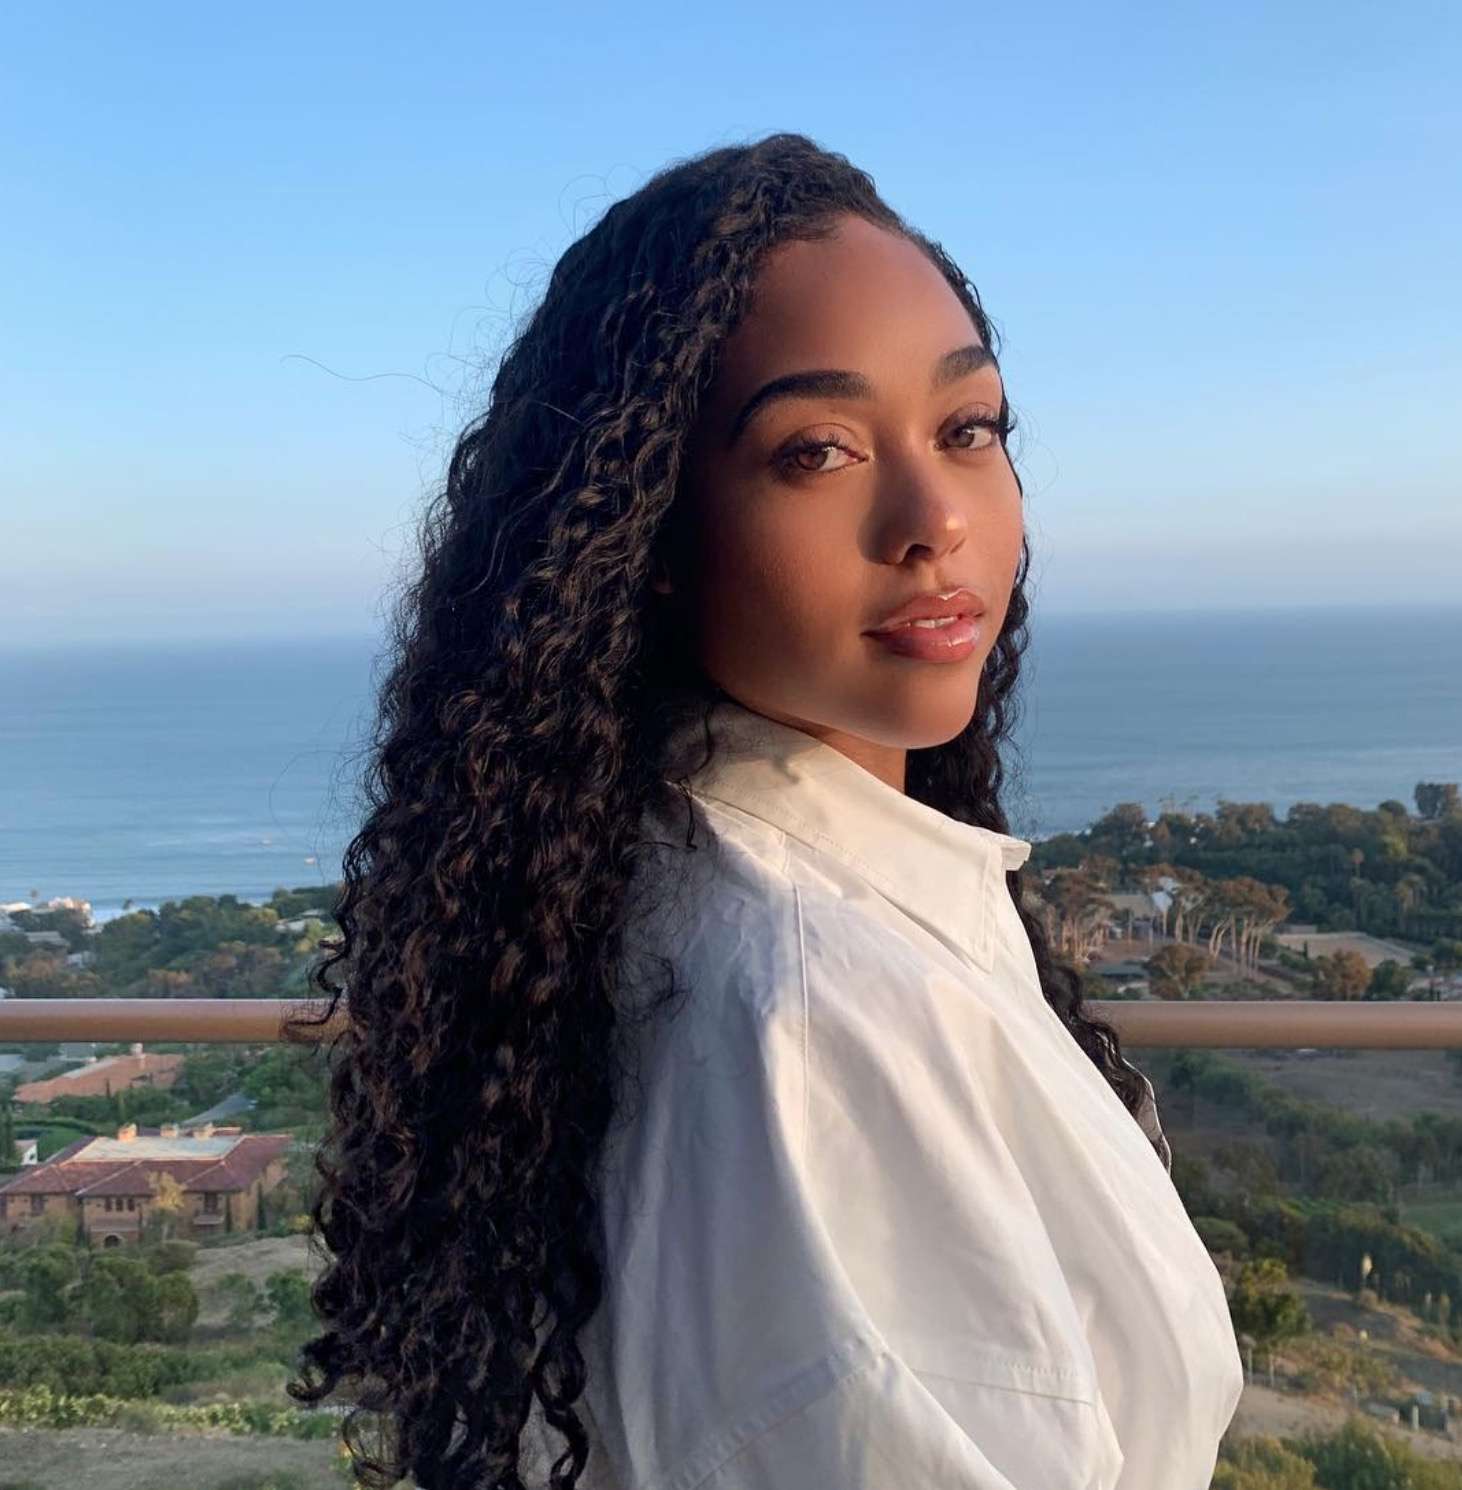 Jordyn Woods Shocks Fans And Posts Pics In Lingerie With Her Man!